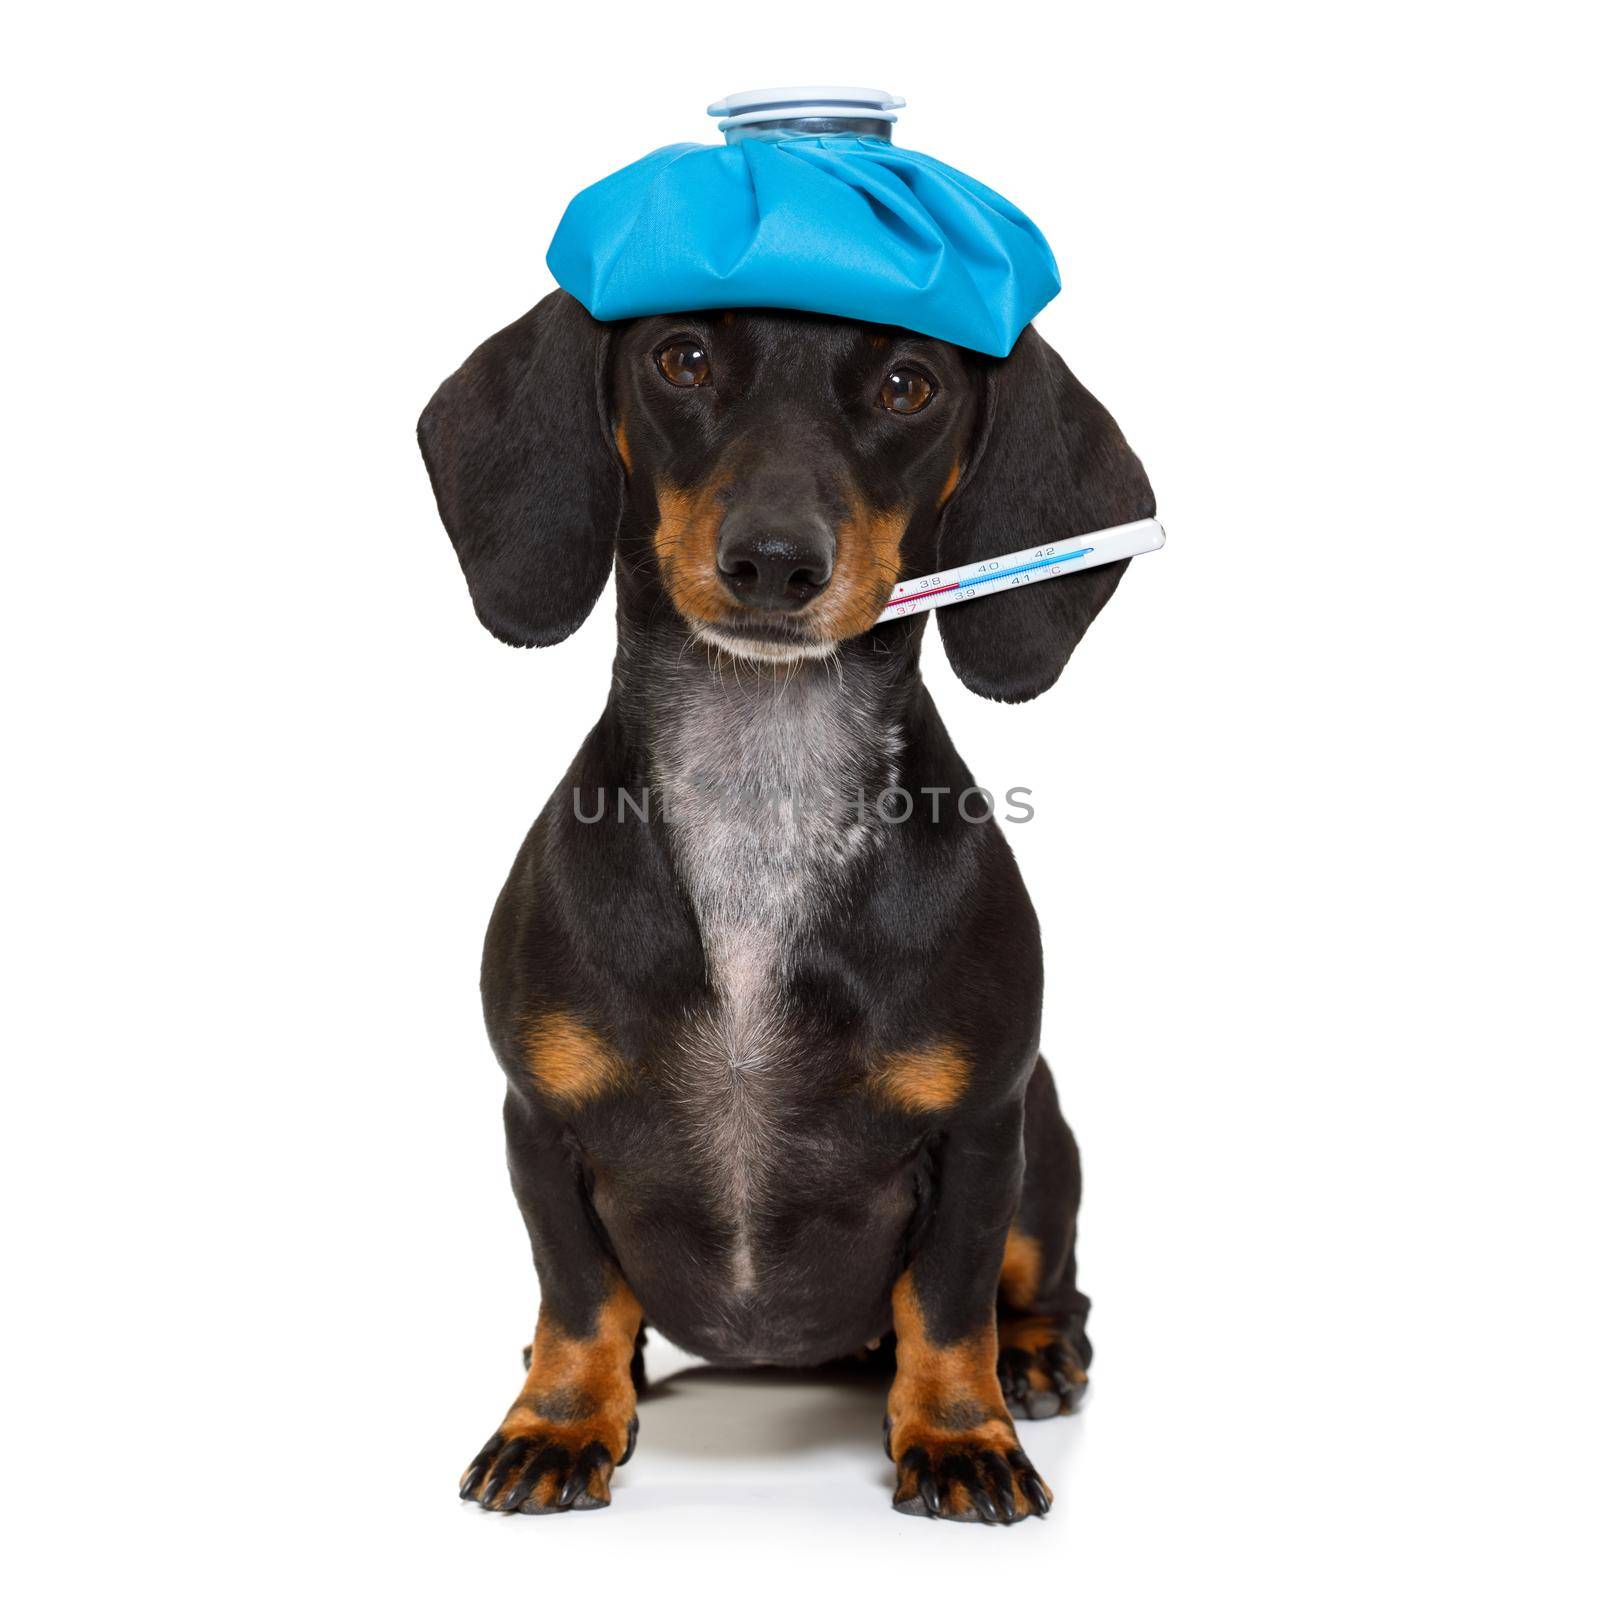 sick and ill dachshund sausage dog  isolated on white background with ice pack or bag on the head, with thermometer